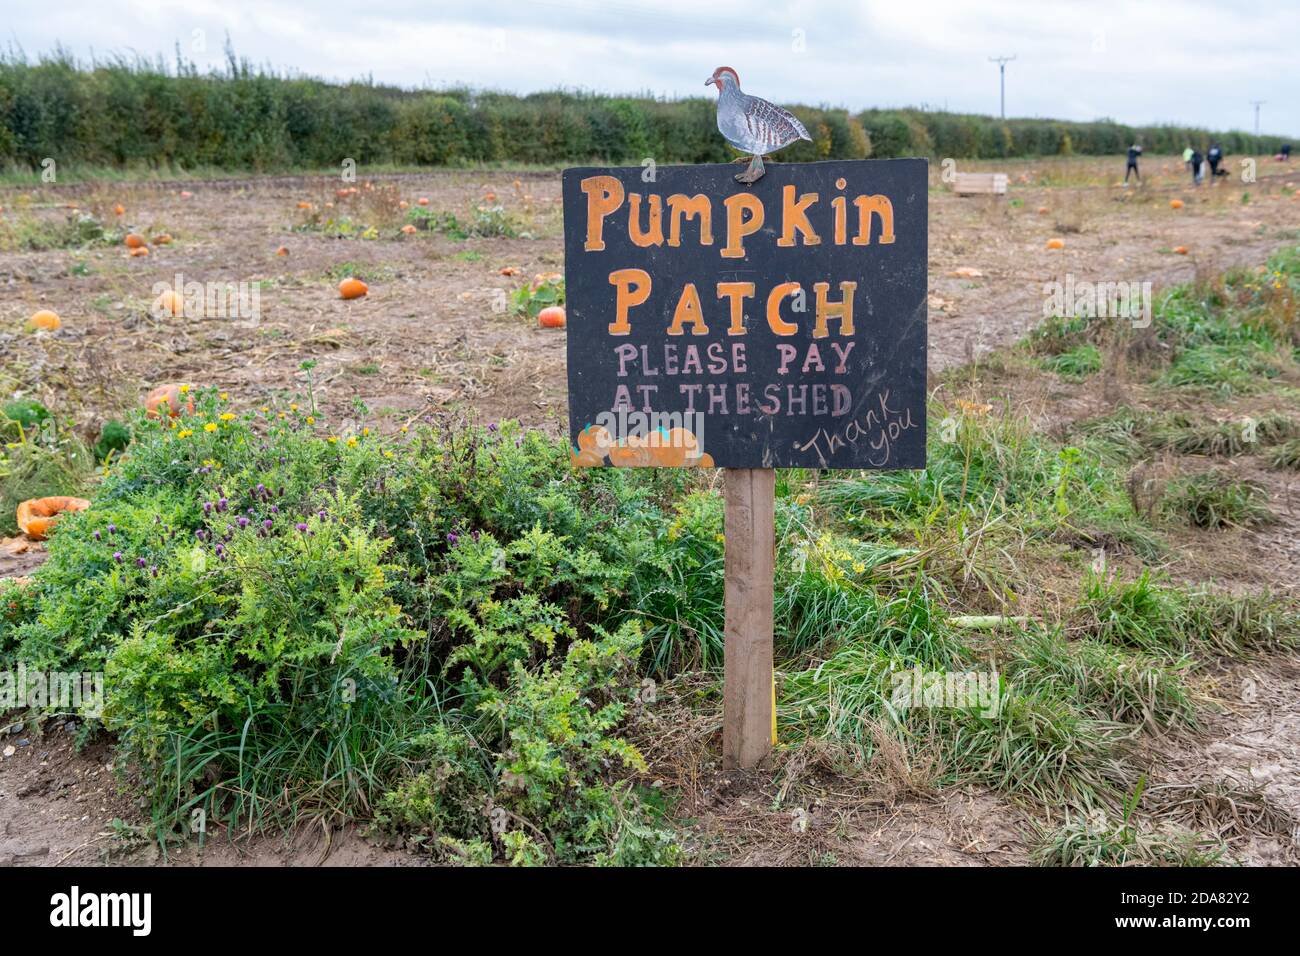 A pumpkin. patch sign at a pumpjin farm in Hertfordshire UK Stock Photo